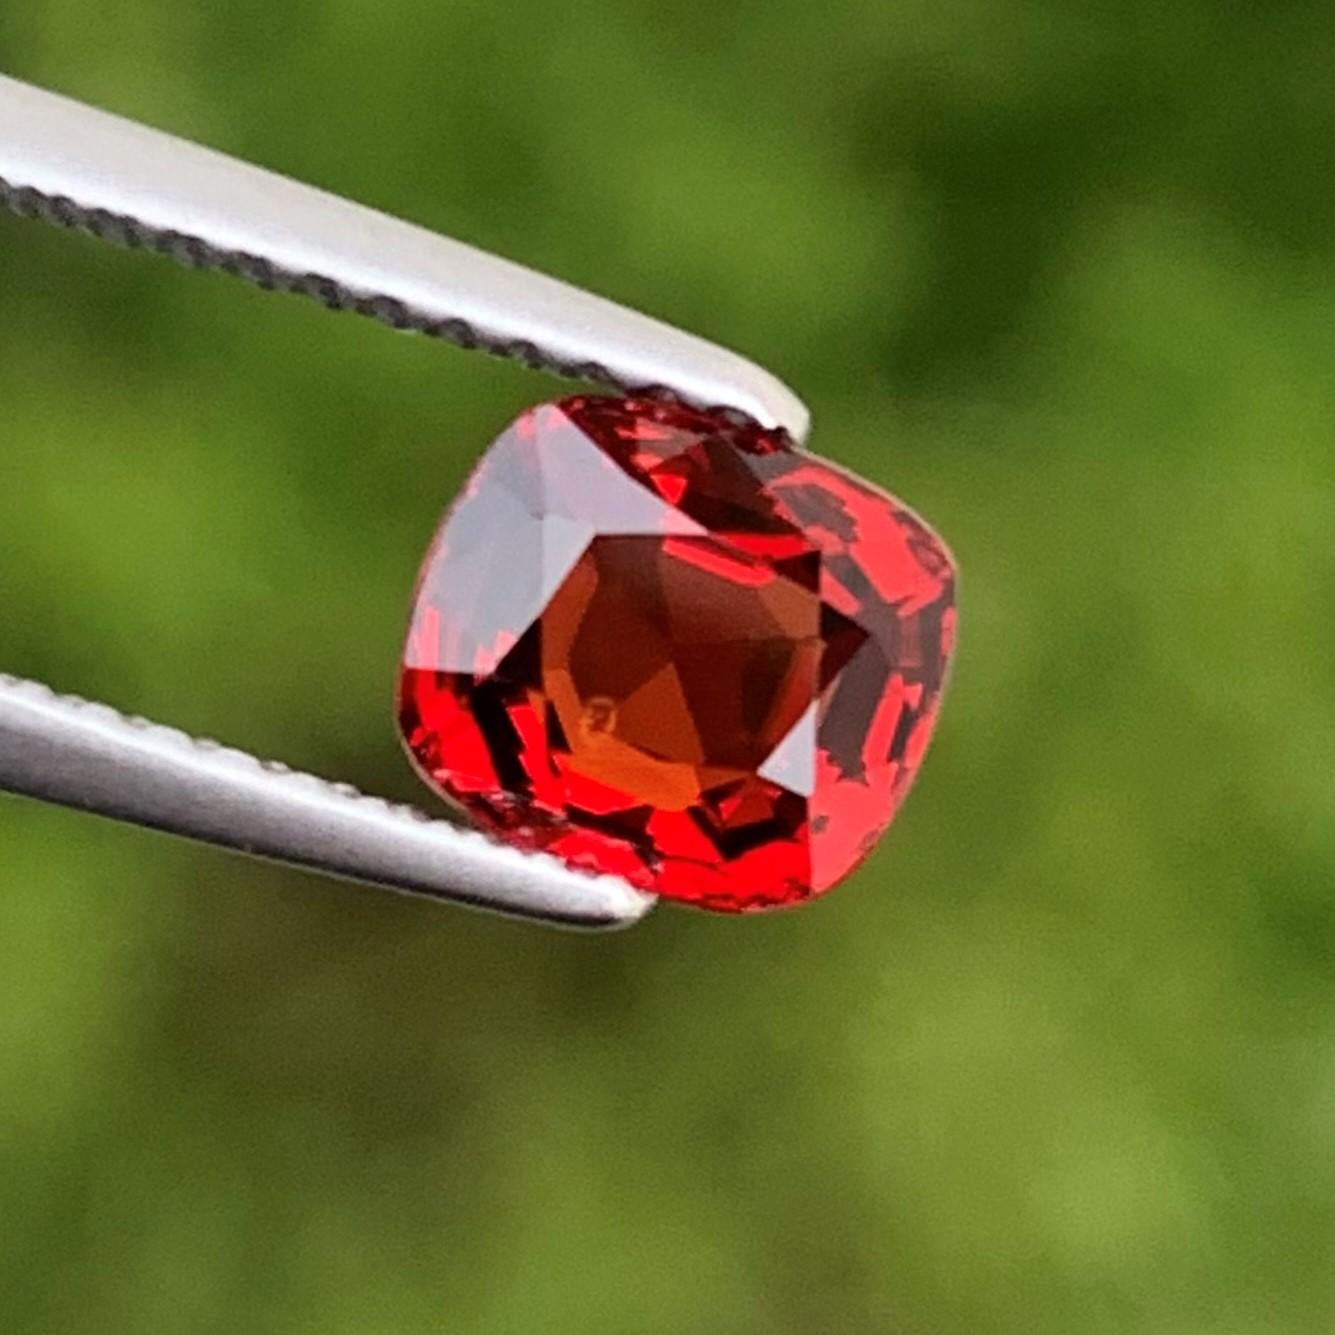 Arts and Crafts 1.20 Carat Natural Loose Cushion Cut Red Spinel Gemstone For Sale